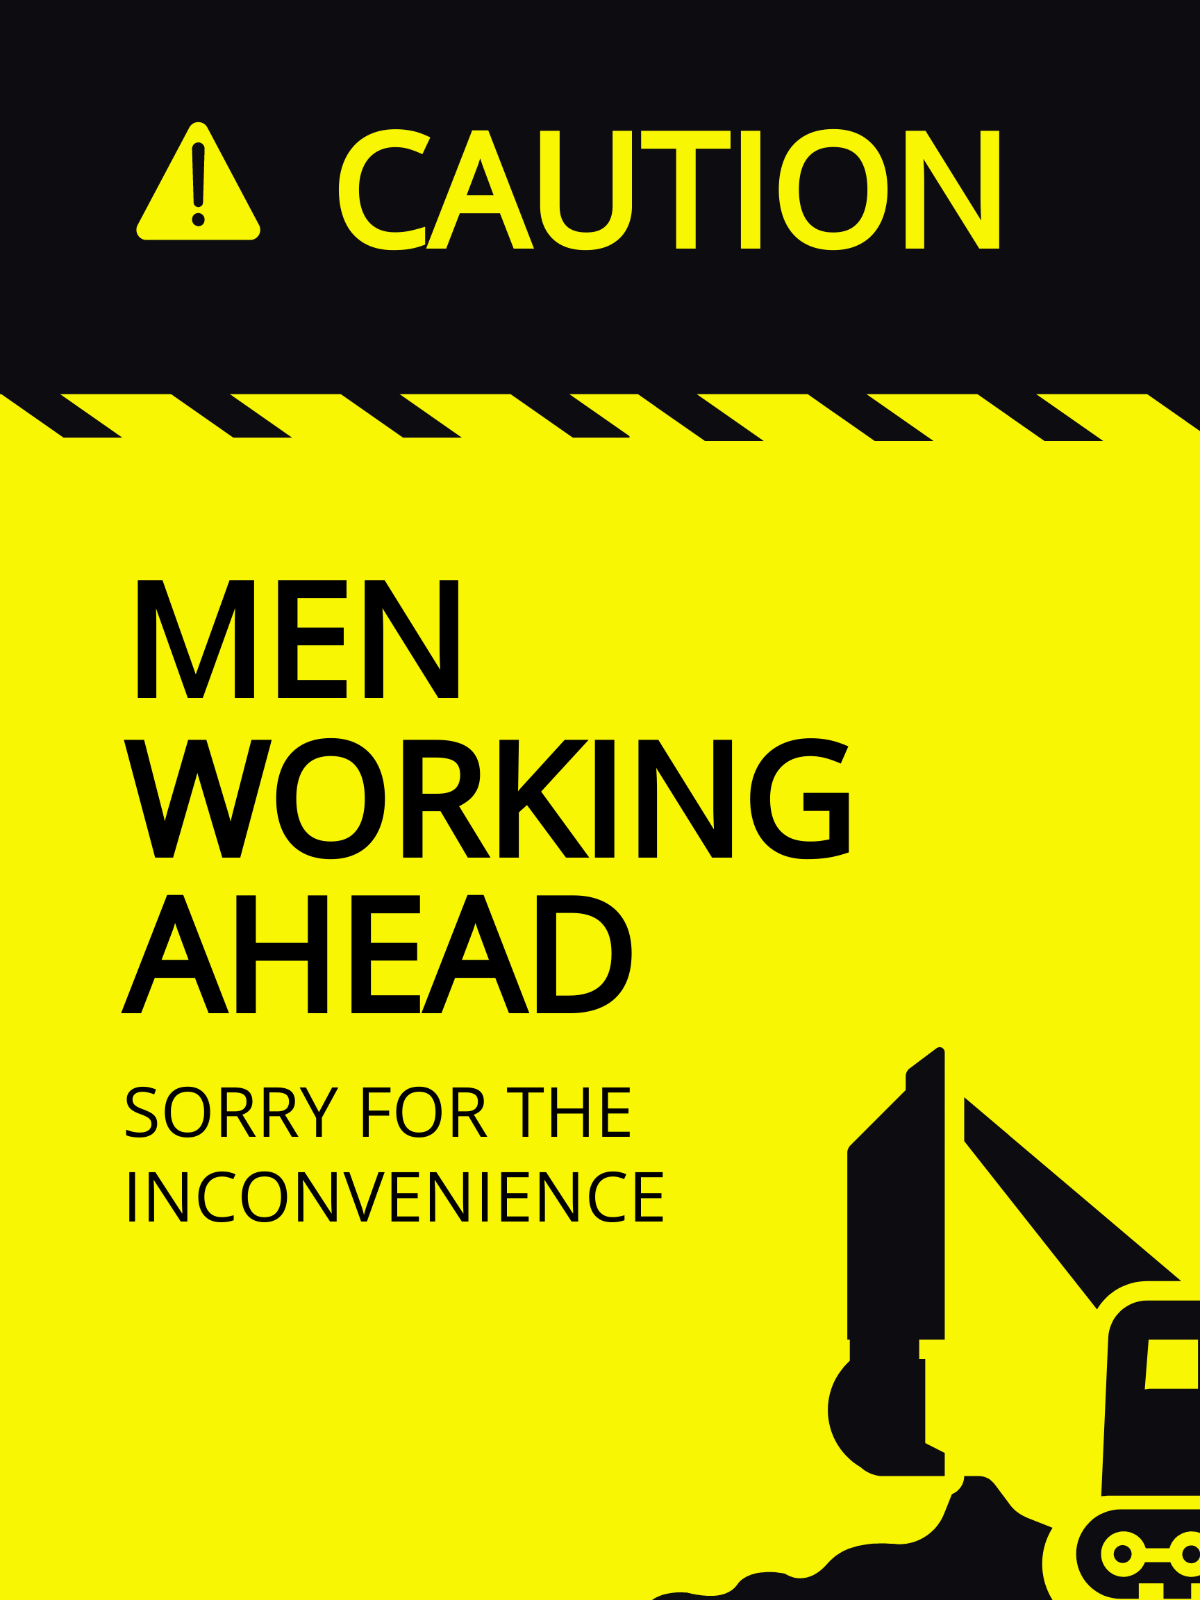 Caution Workers Ahead Sign Template